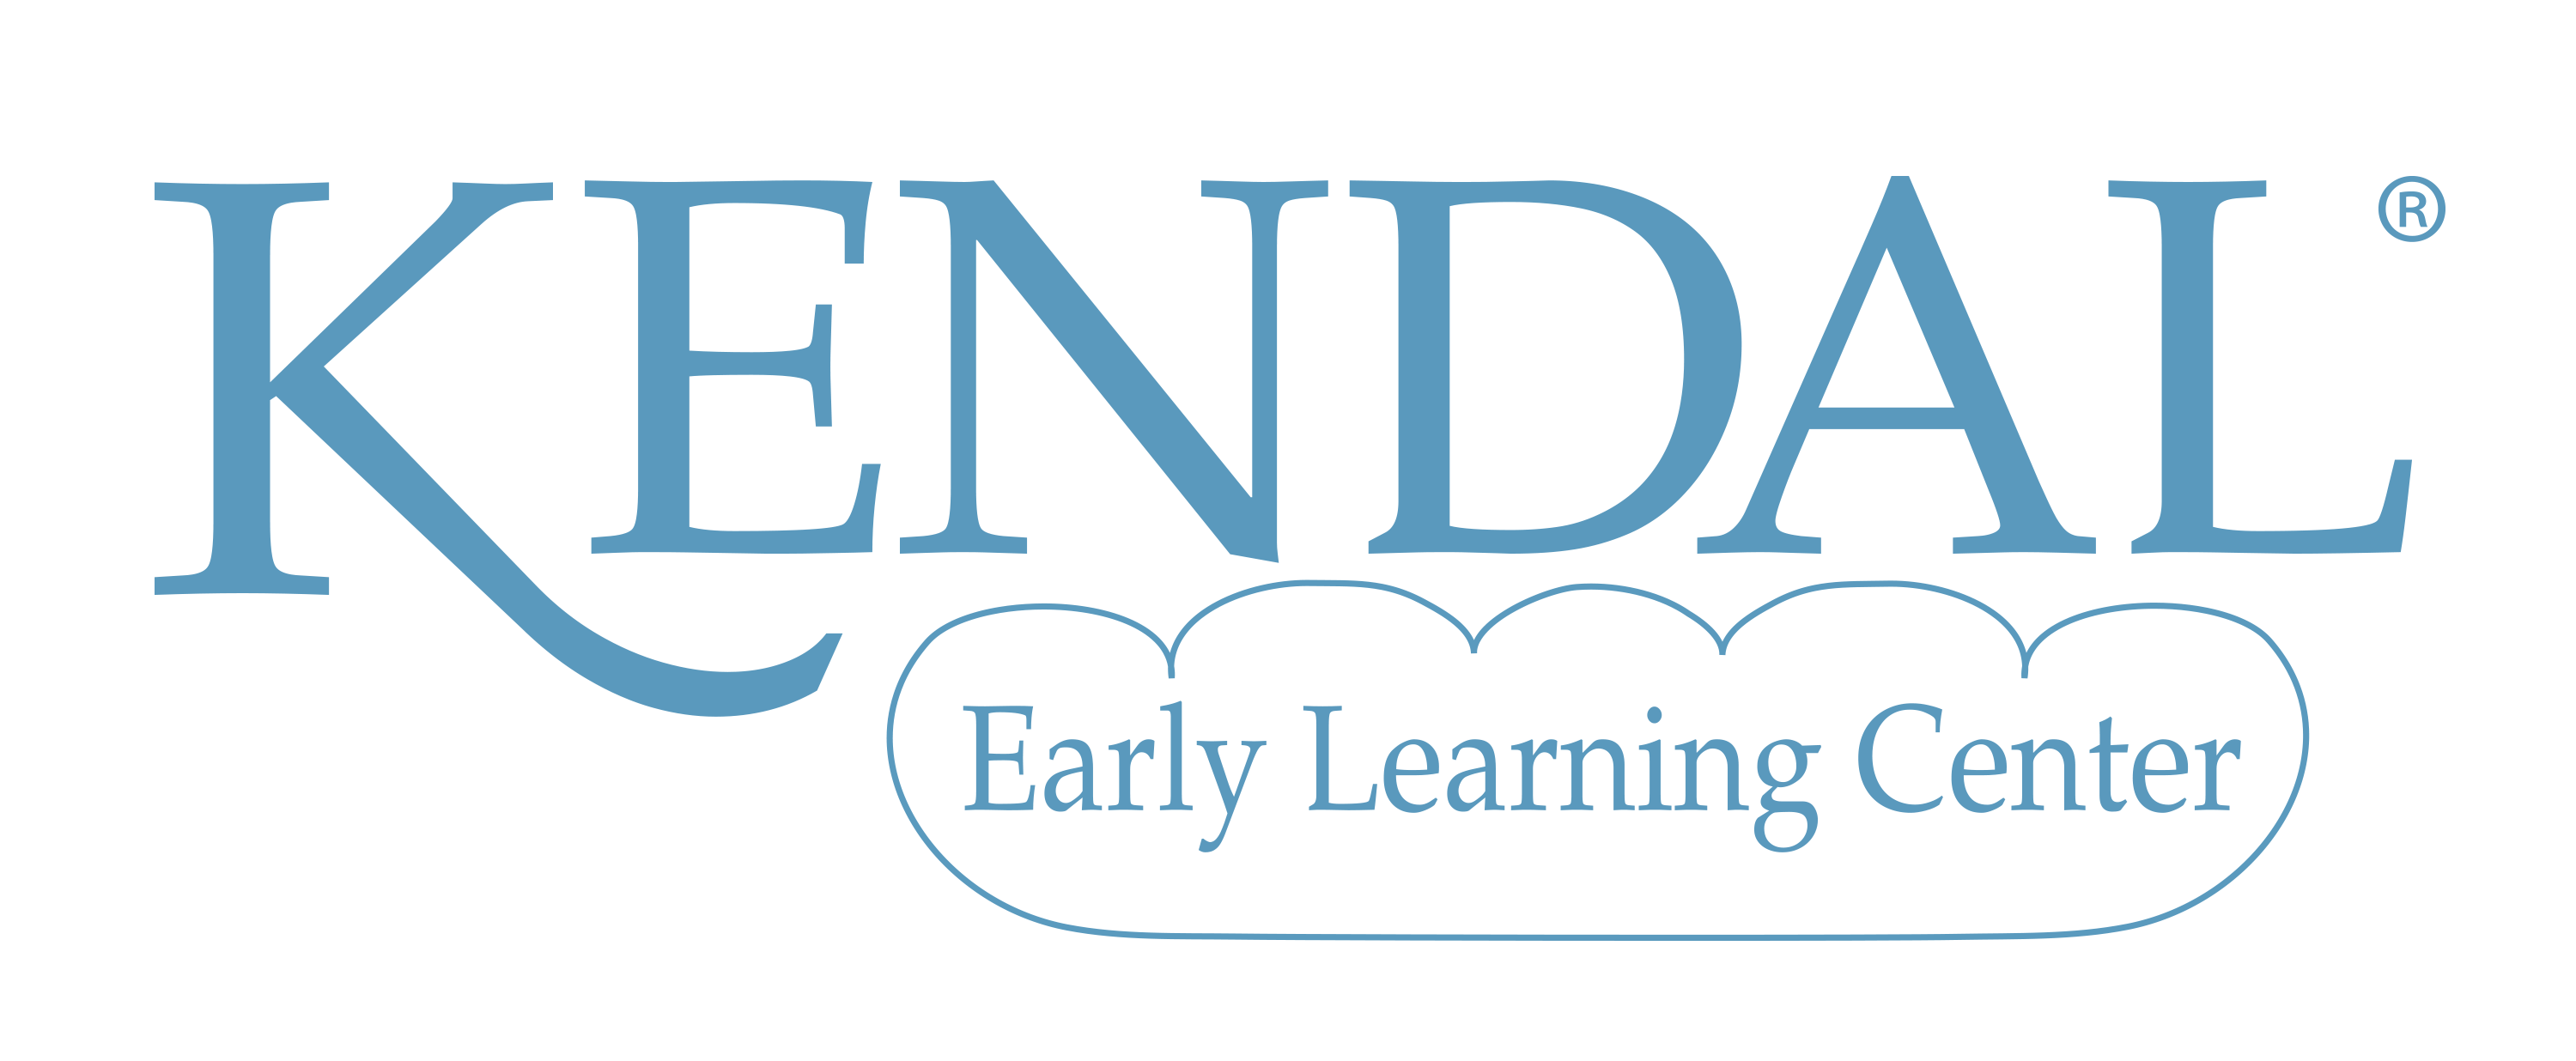 KENDAL EARLY LEARNING CENTER